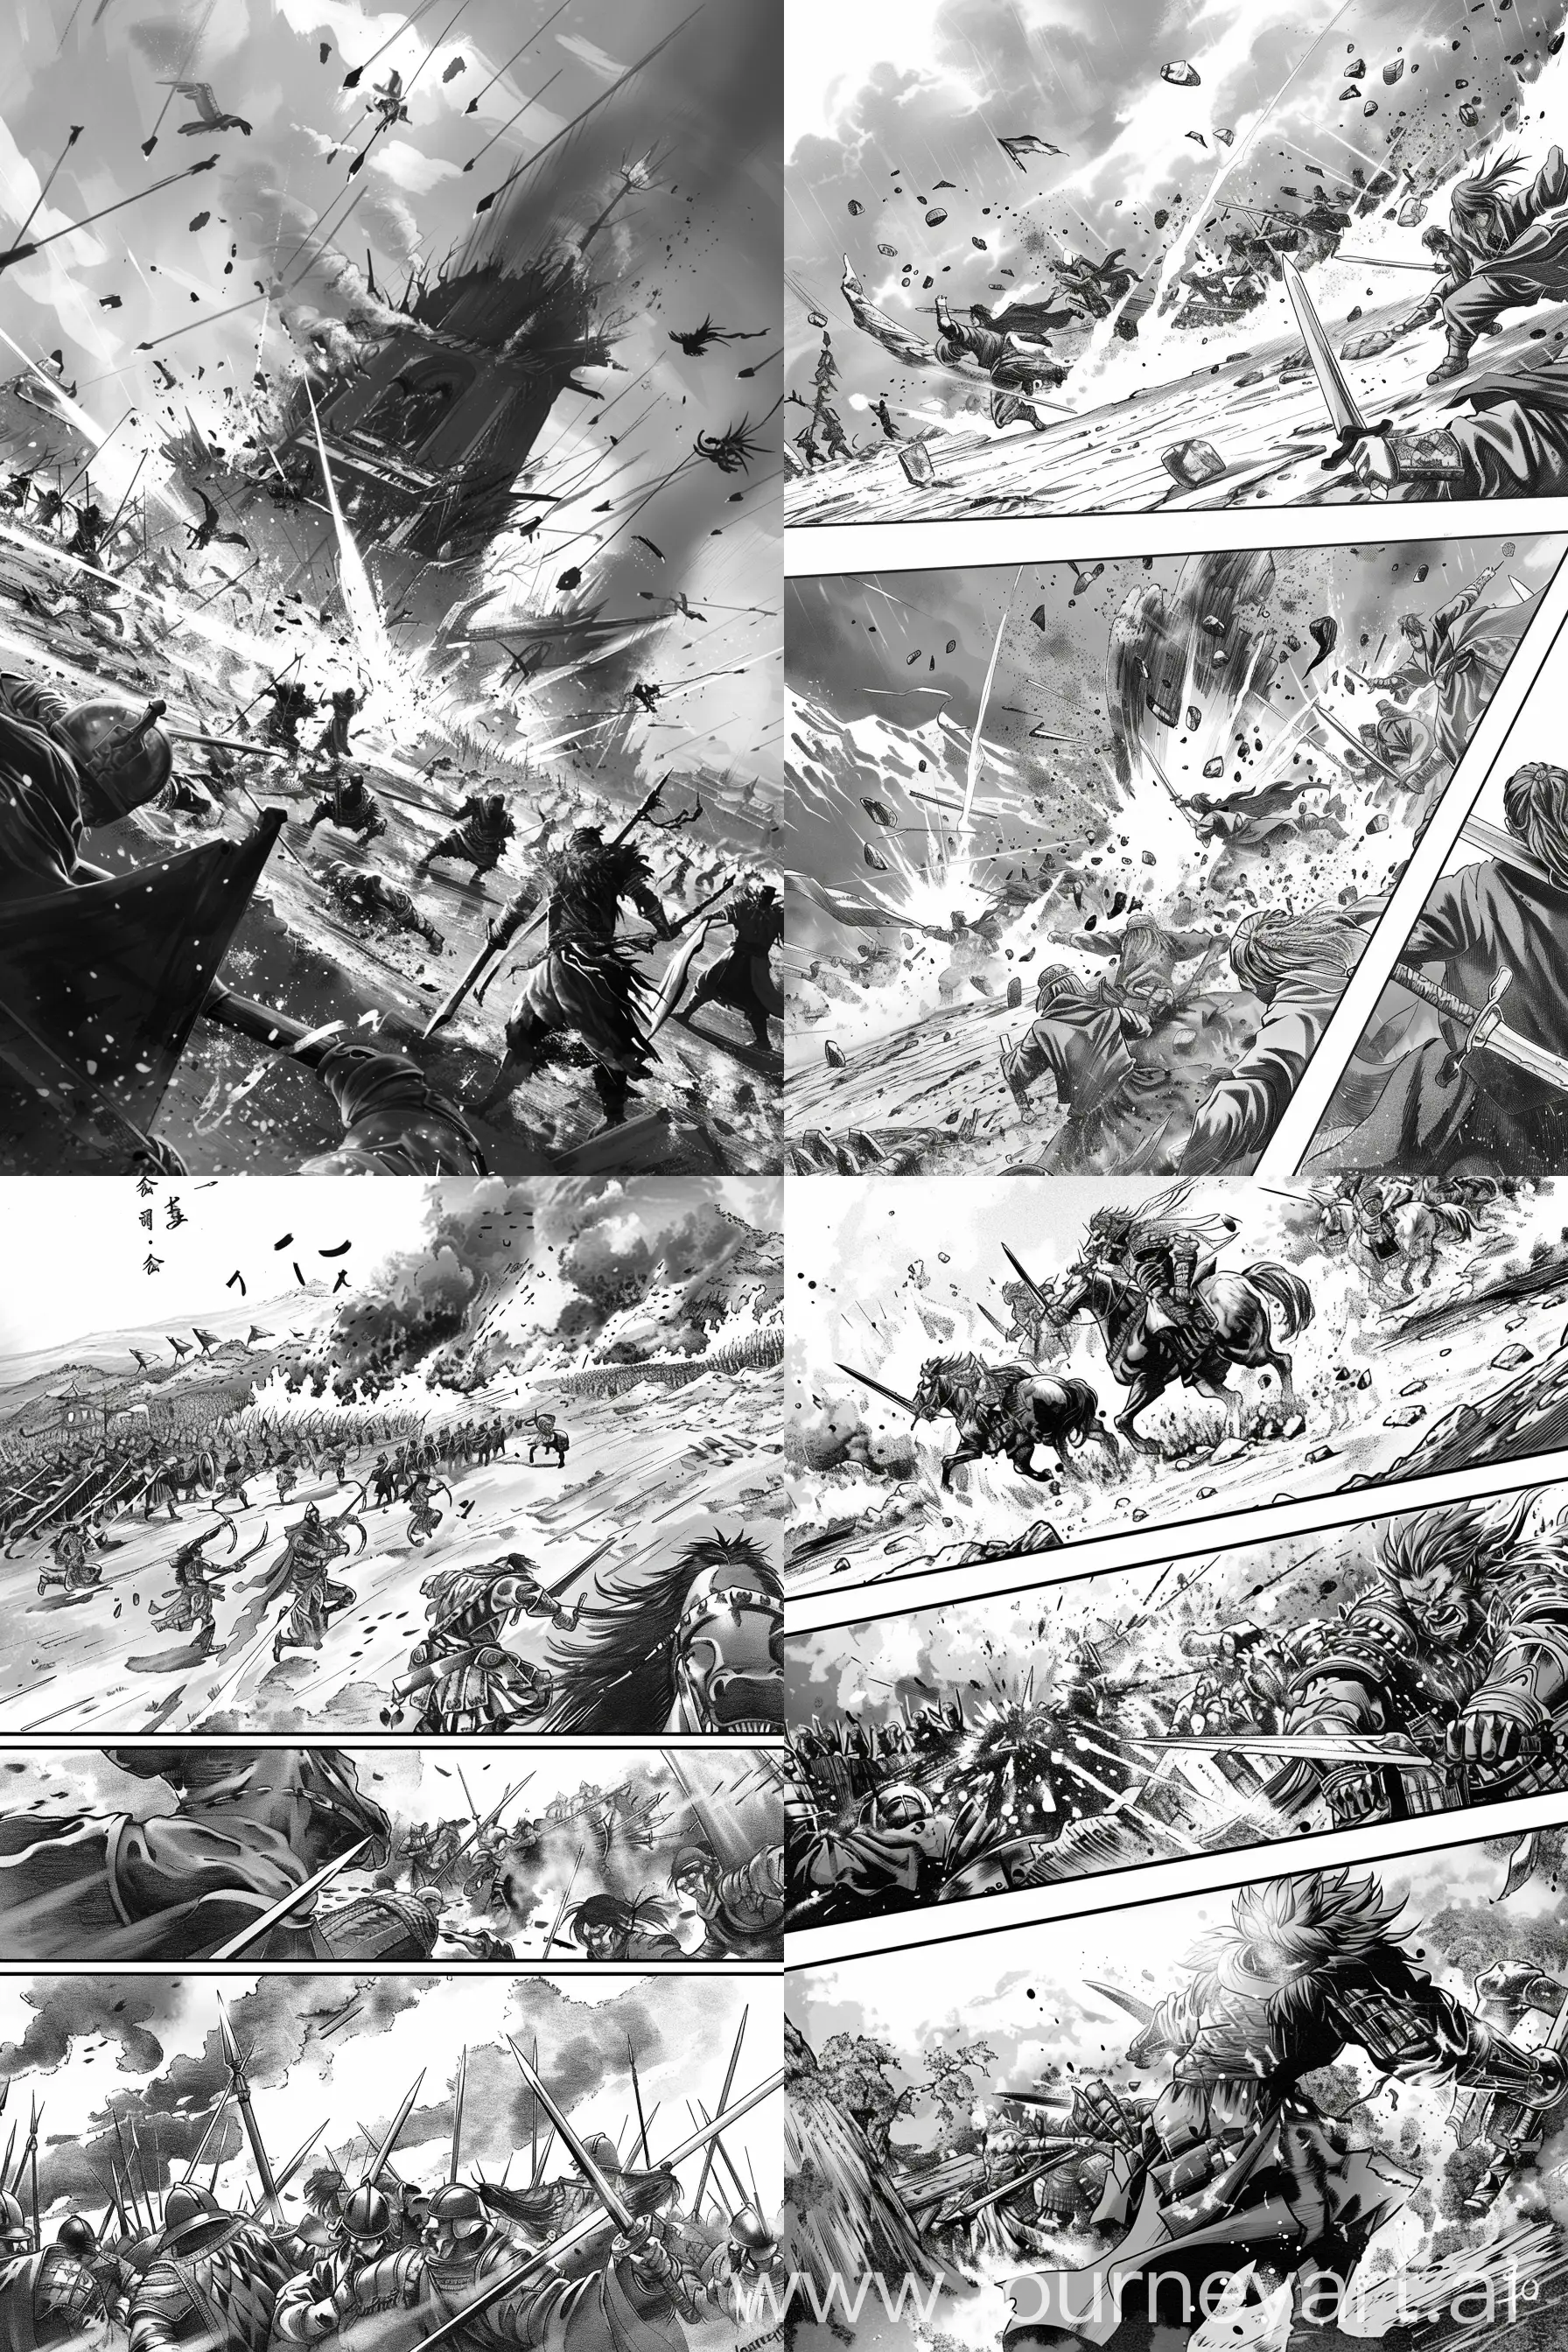 Epic-MangaStyle-Battle-Wizards-and-Warriors-Clash-in-Monochrome-Fantasy-War